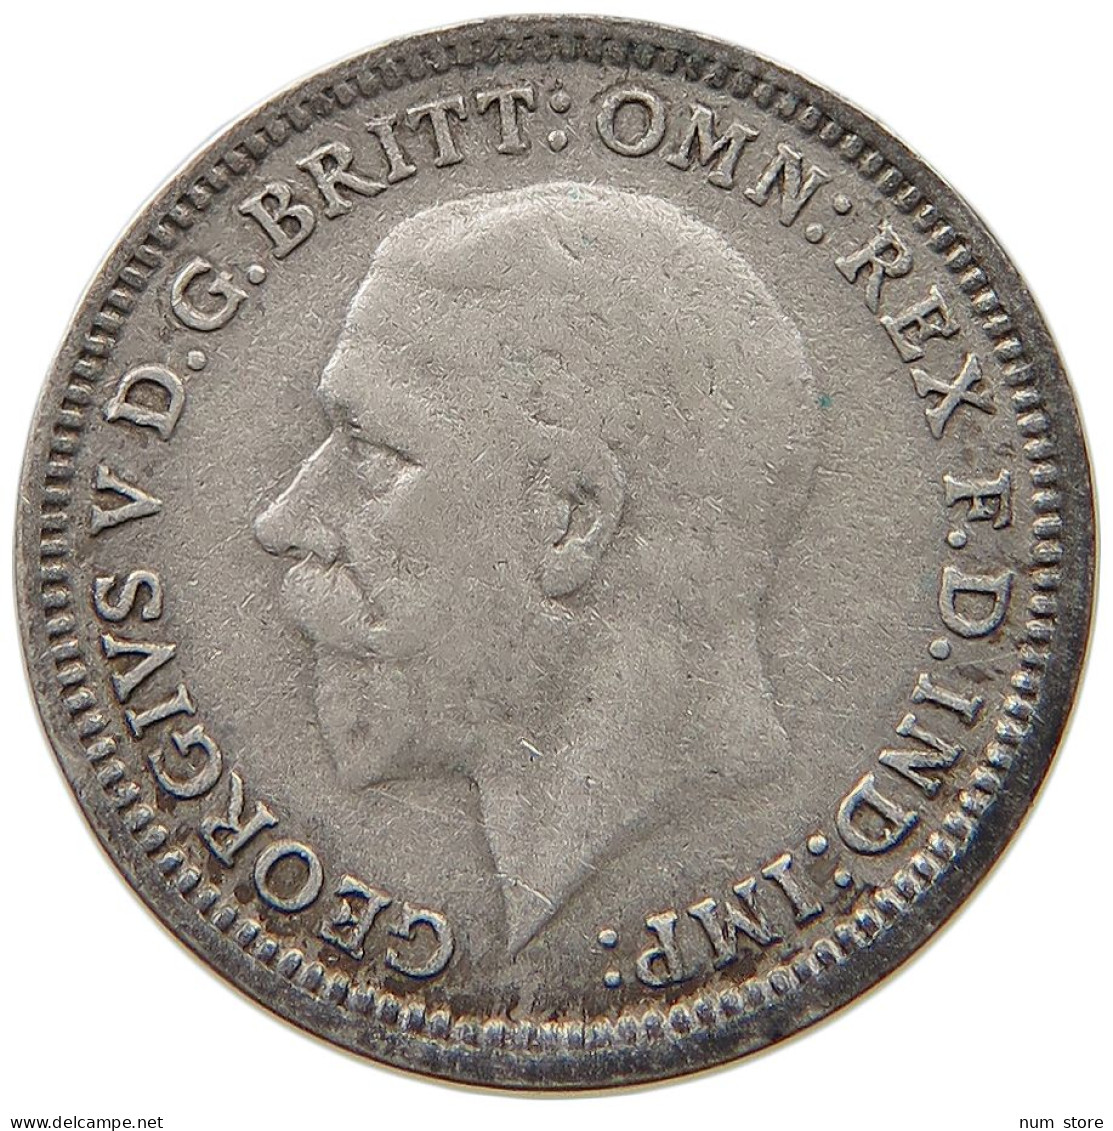 GREAT BRITAIN THREEPENCE 1930 #a034 0079 - F. 3 Pence